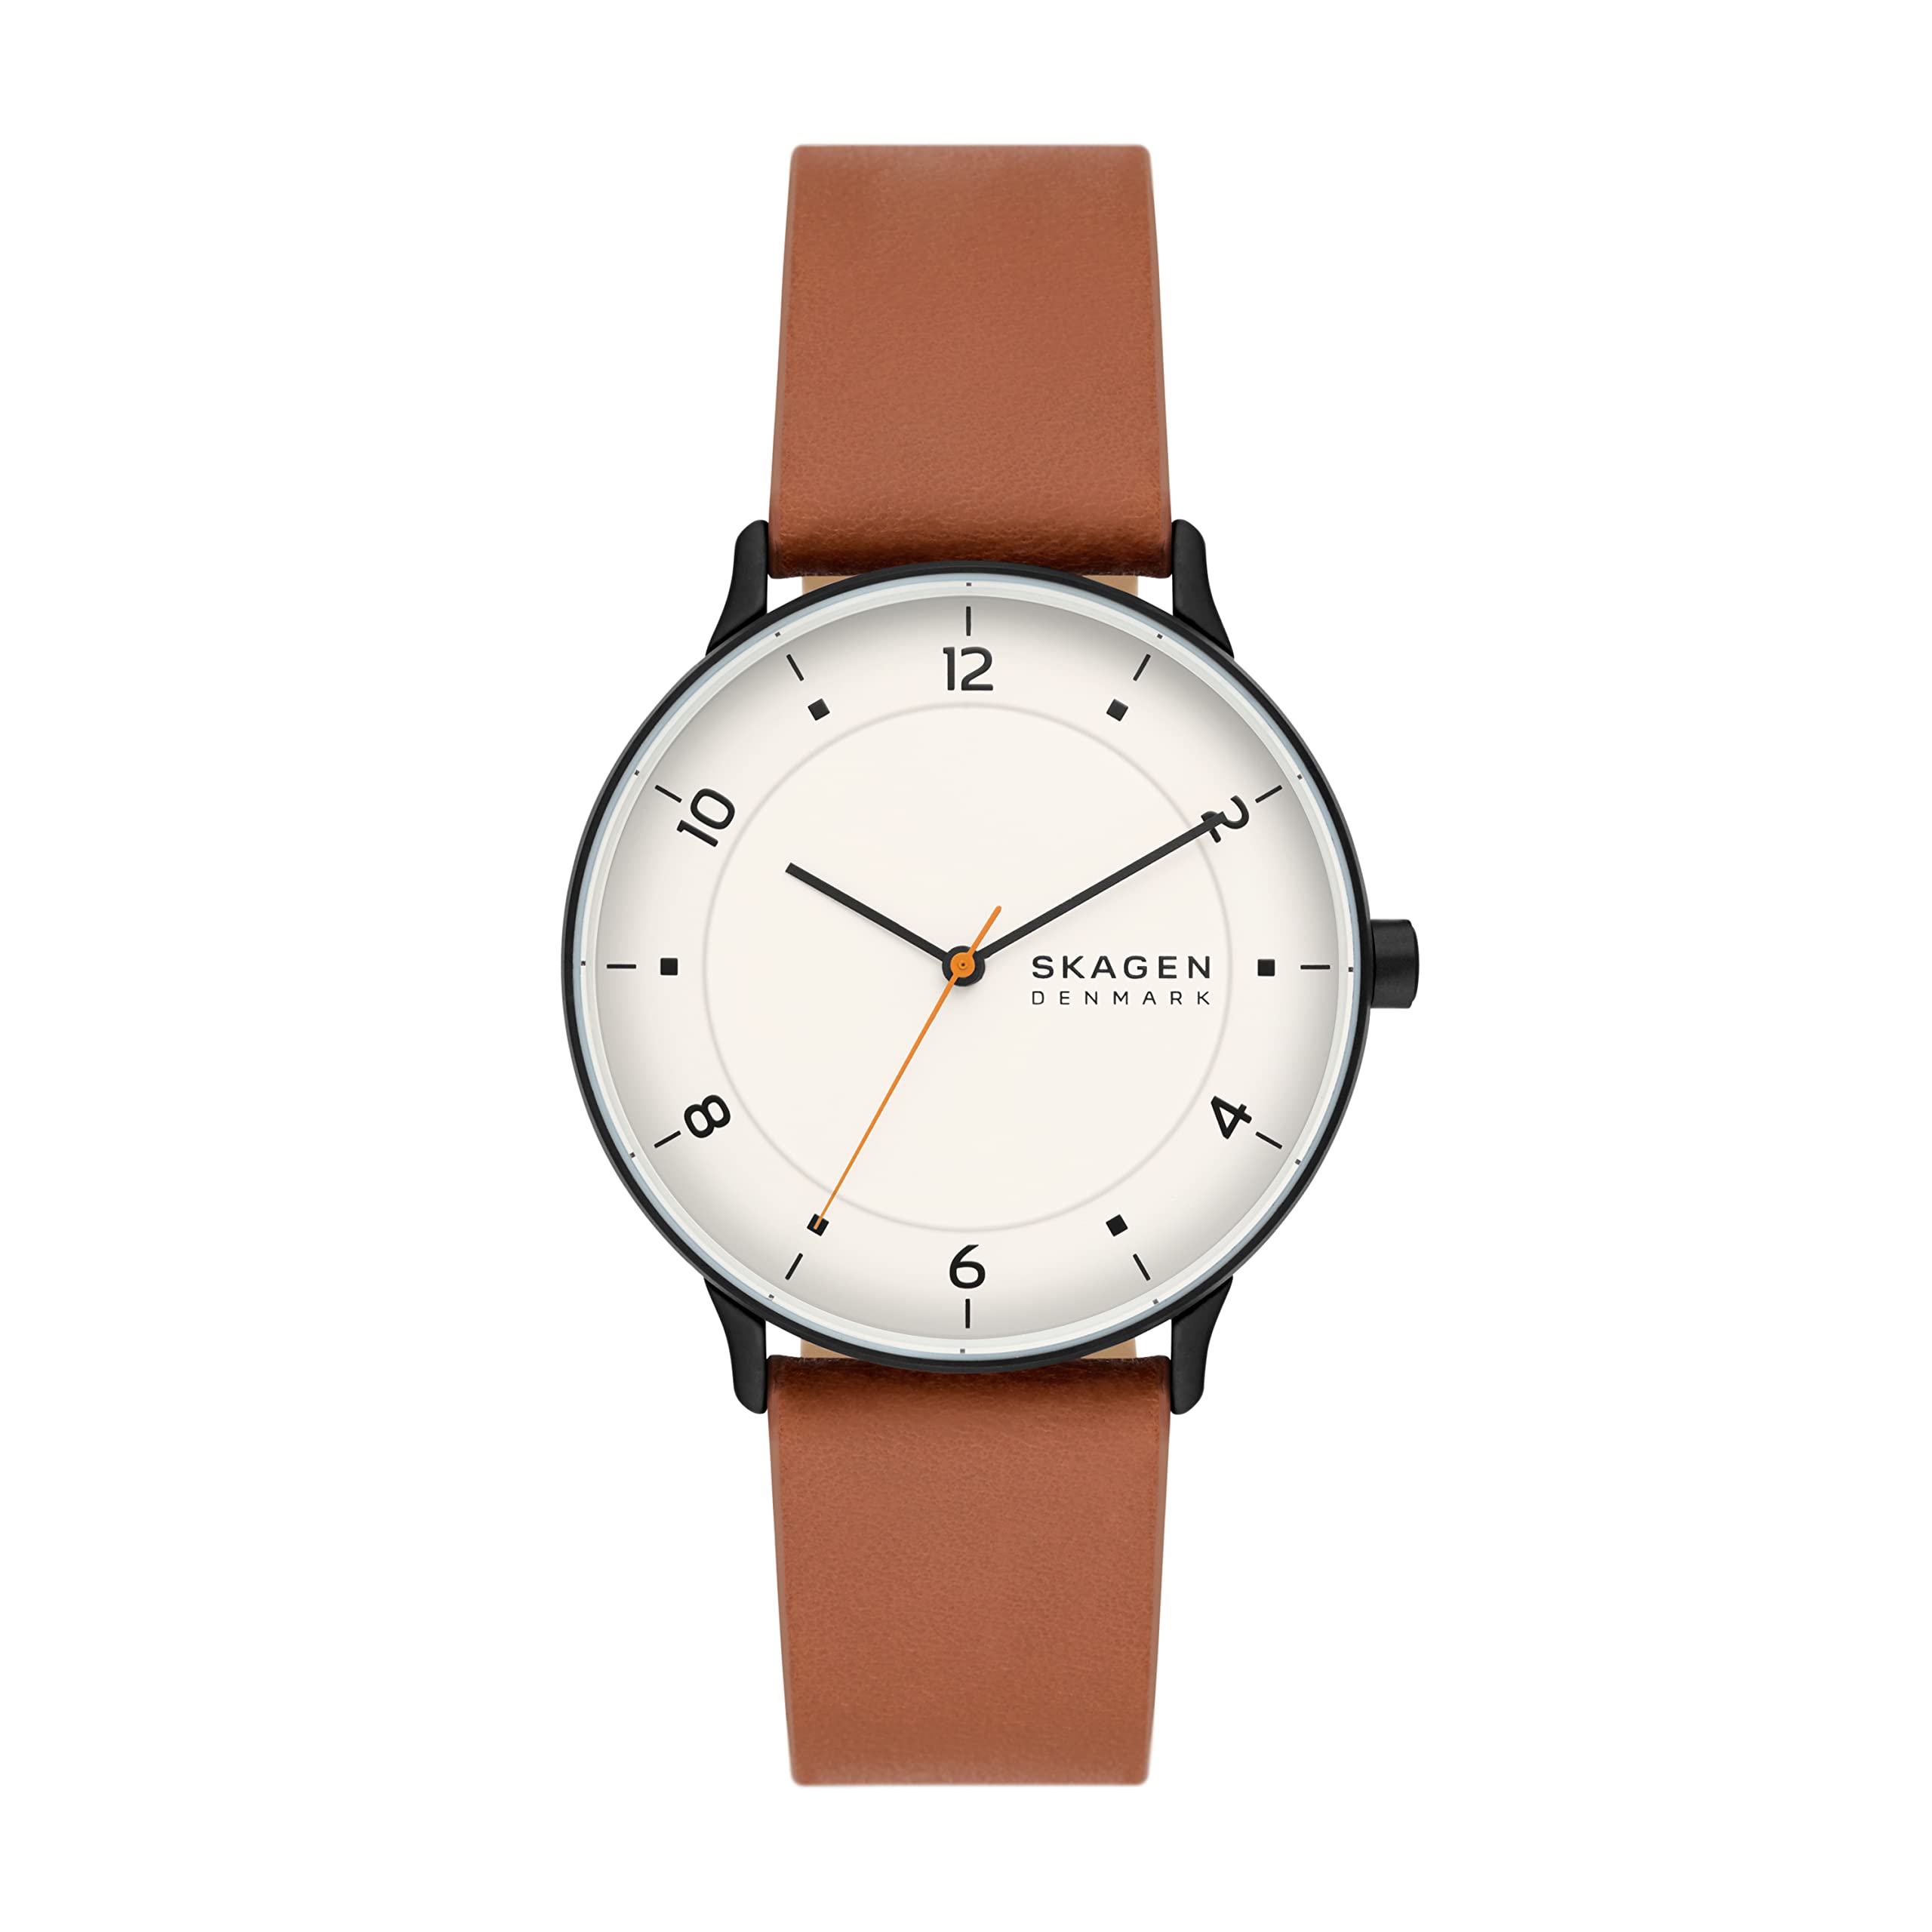 Skagen Men's Riis Minimalist Three-Hand Watch with Leather or Mesh Band